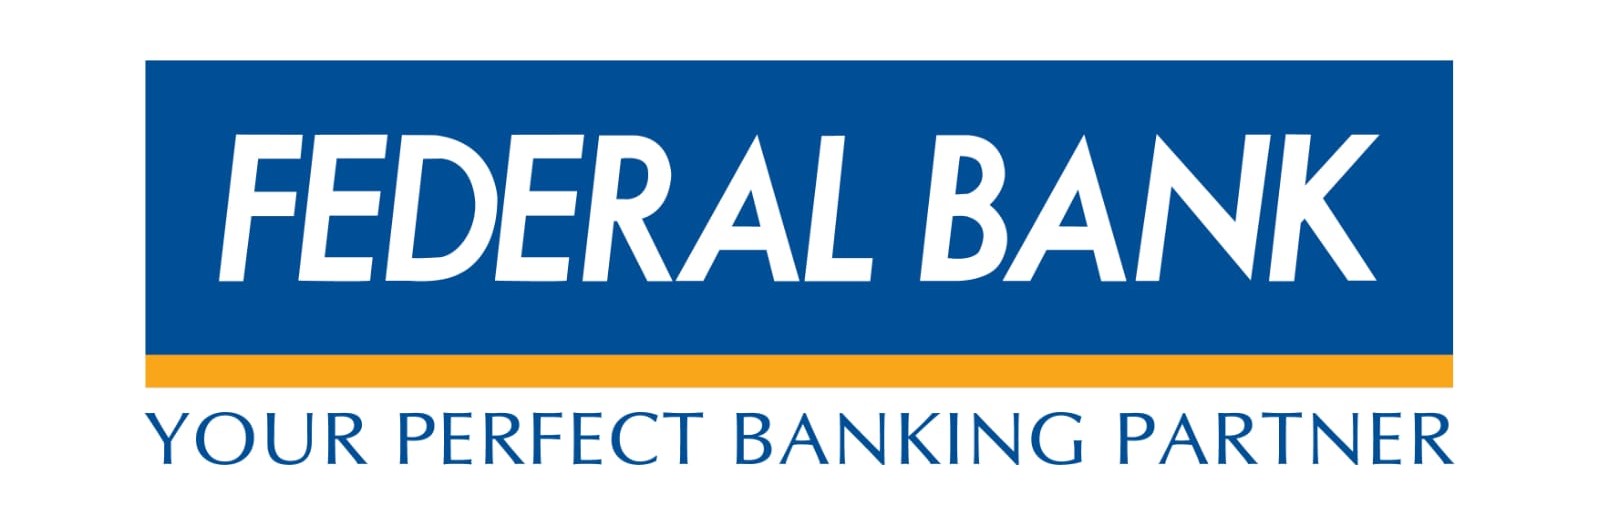 Federal Bank offers special rates for NR Term Deposits